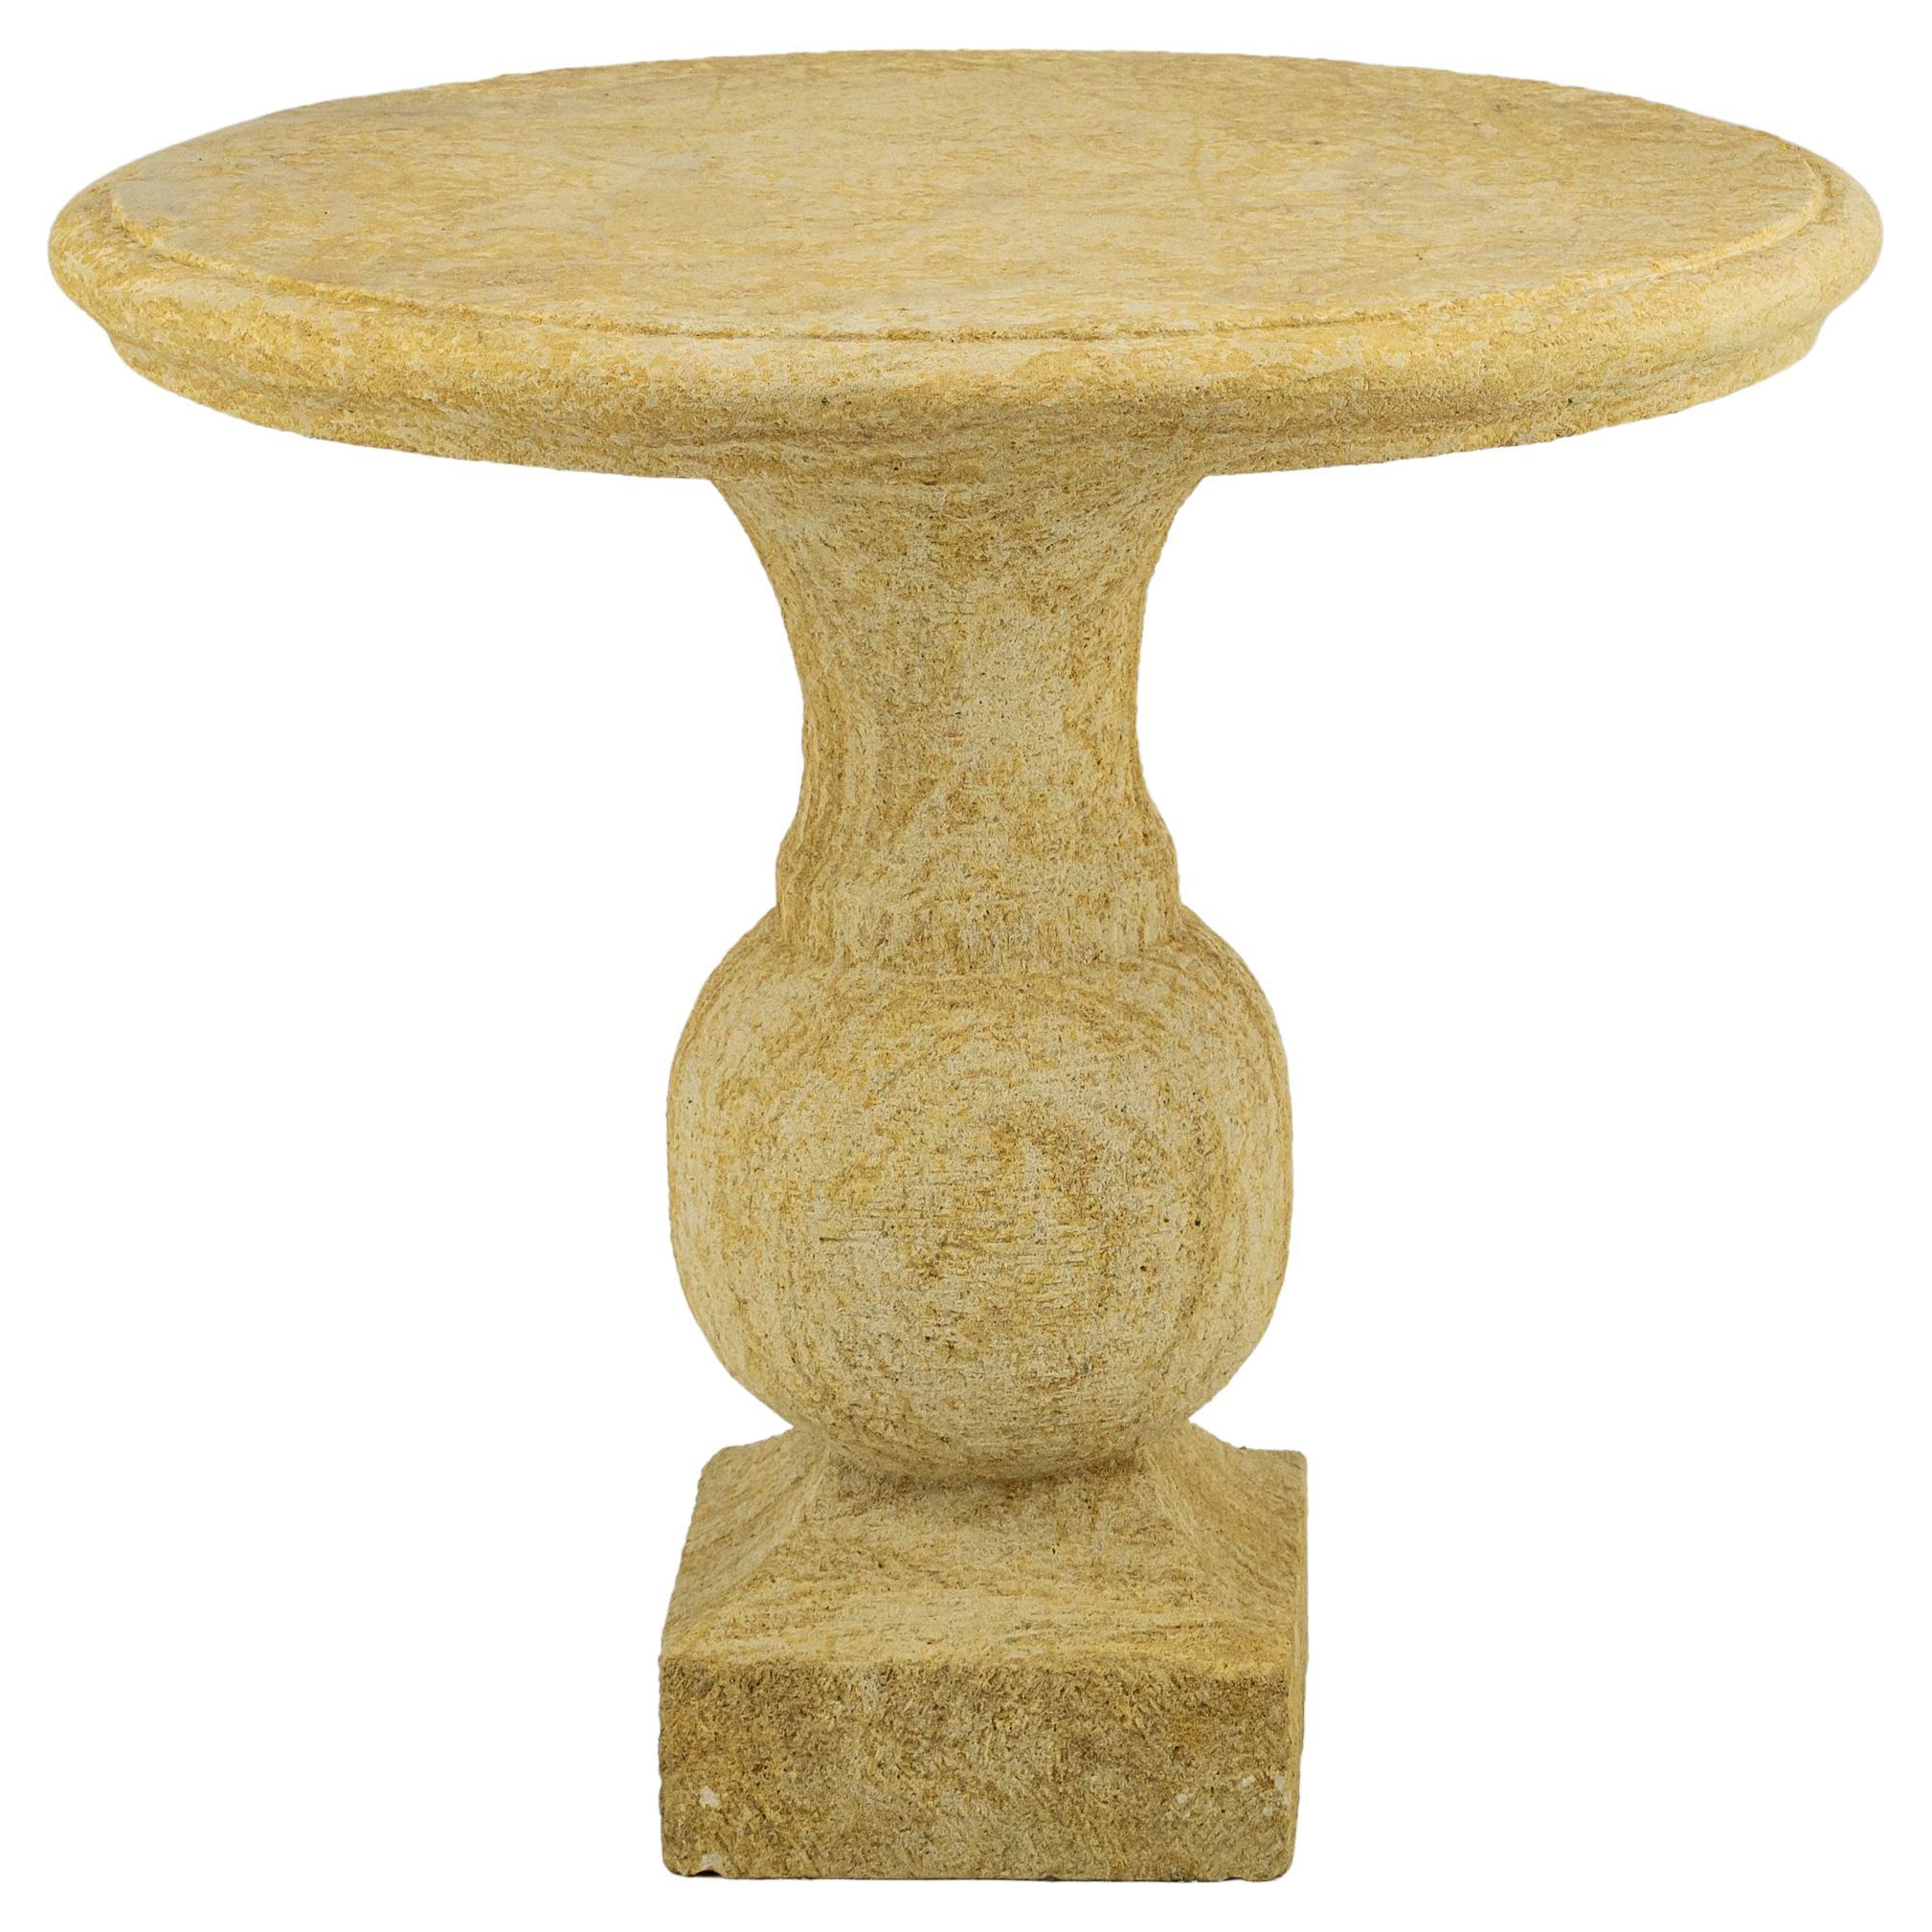 Hand Carved Golden Cotswold Oolitic Limestone Table For Sale